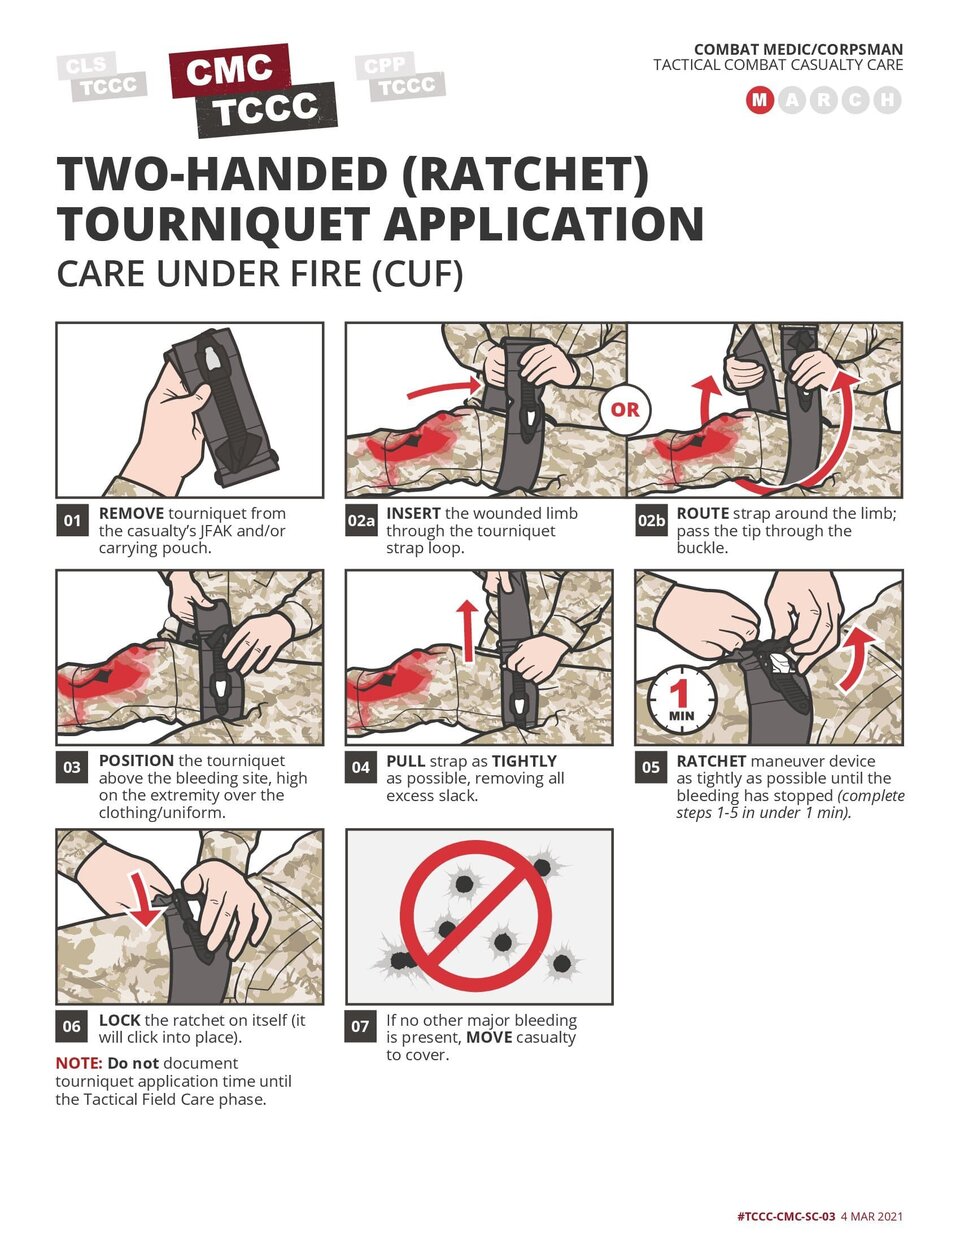 Two-Handed (Ratchet) Tourniquet Application in CUF Skills Card